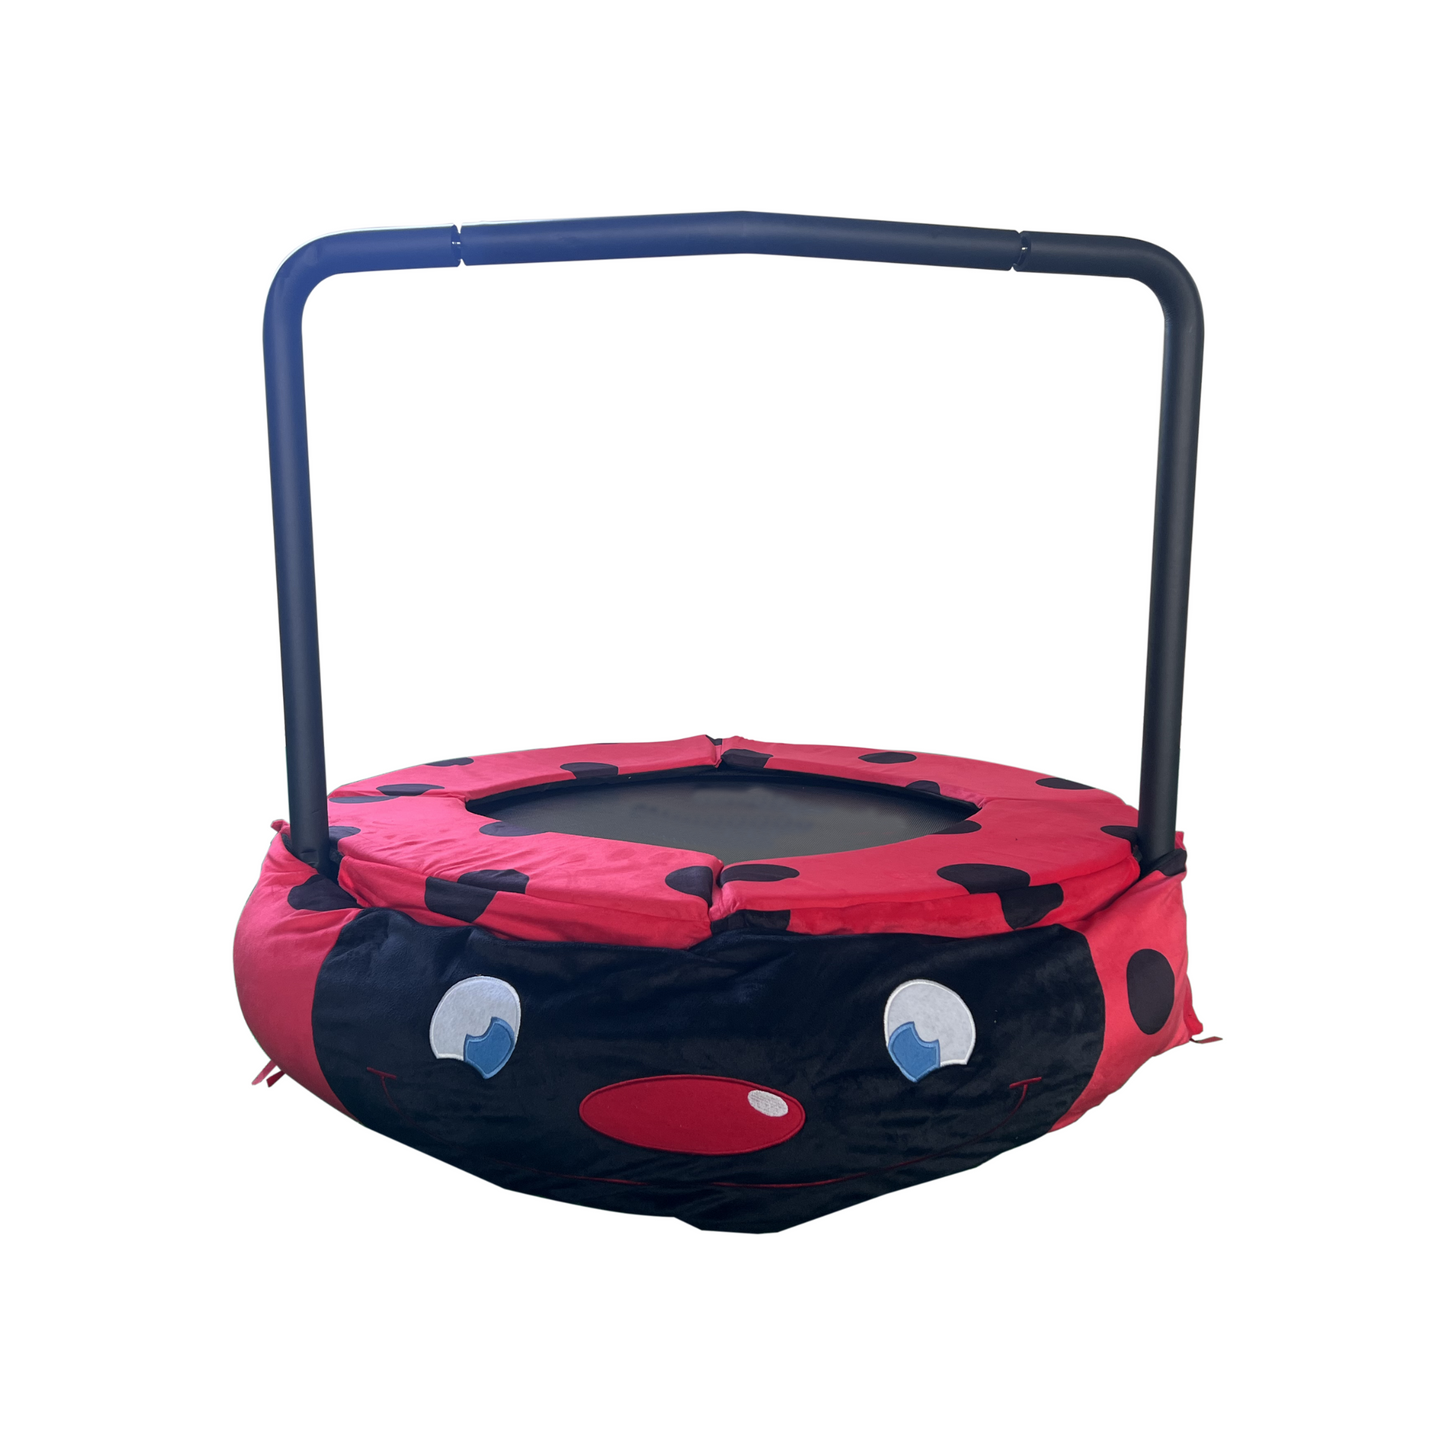 Assembled Children's Trampoline: Happy Expression, Ladybug Design, Foldable Iron Tube - Ideal for Kids Age 3-7 (Outdoor/Indoor, Black/Red)